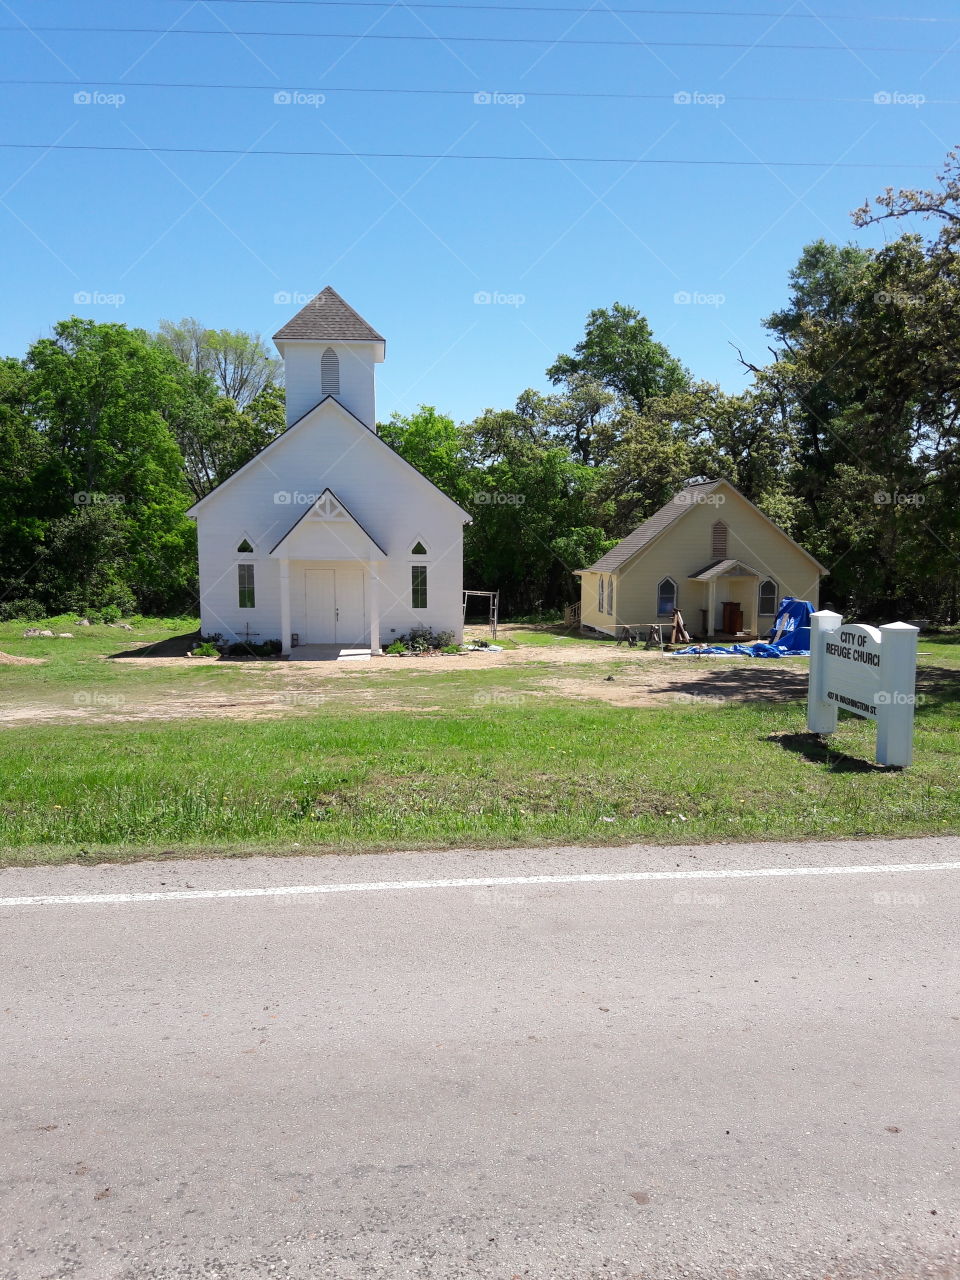 Old church in country.Roundtop,TX.